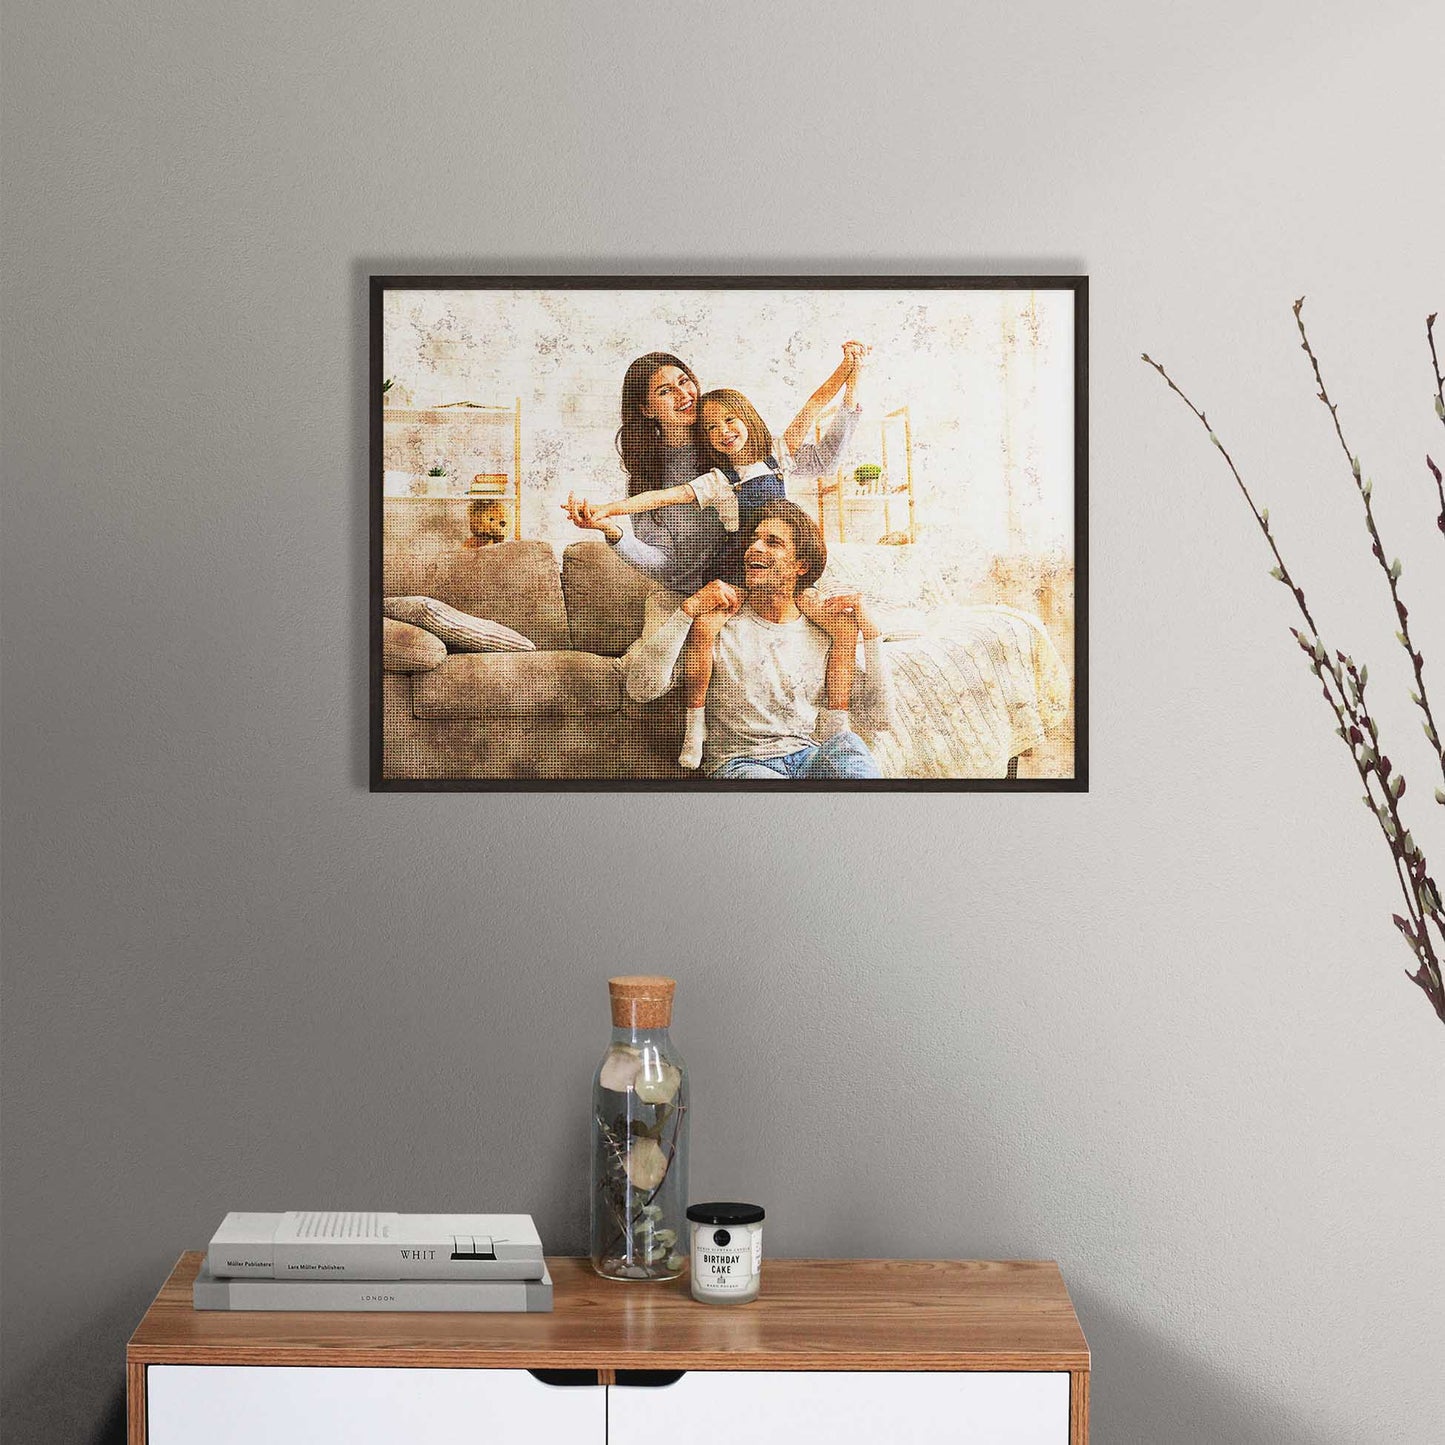 The Personalised Grunge FX Framed Print is an exceptional artwork that combines grunge style with a halftone effect, capturing a retro, old-school coolness. Crafted on gallery-quality paper and encased in a natural wooden frame